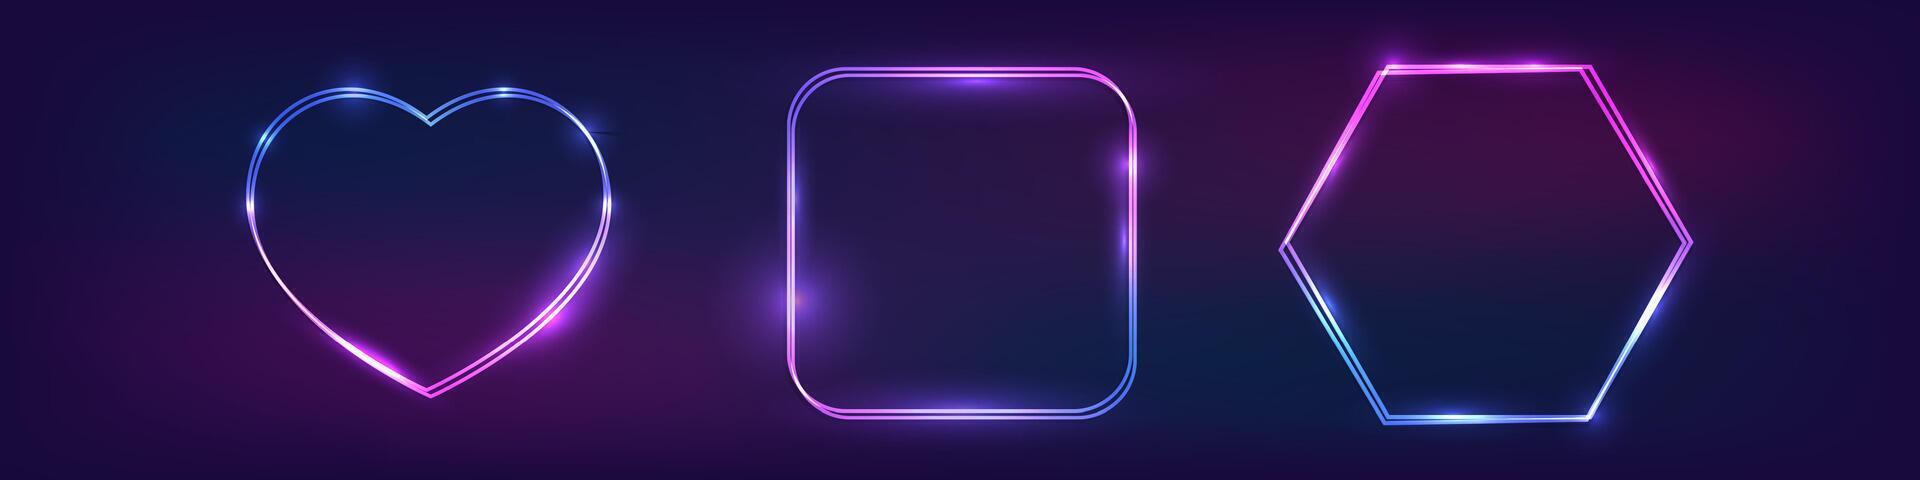 Set of neon double frames with shining effects vector